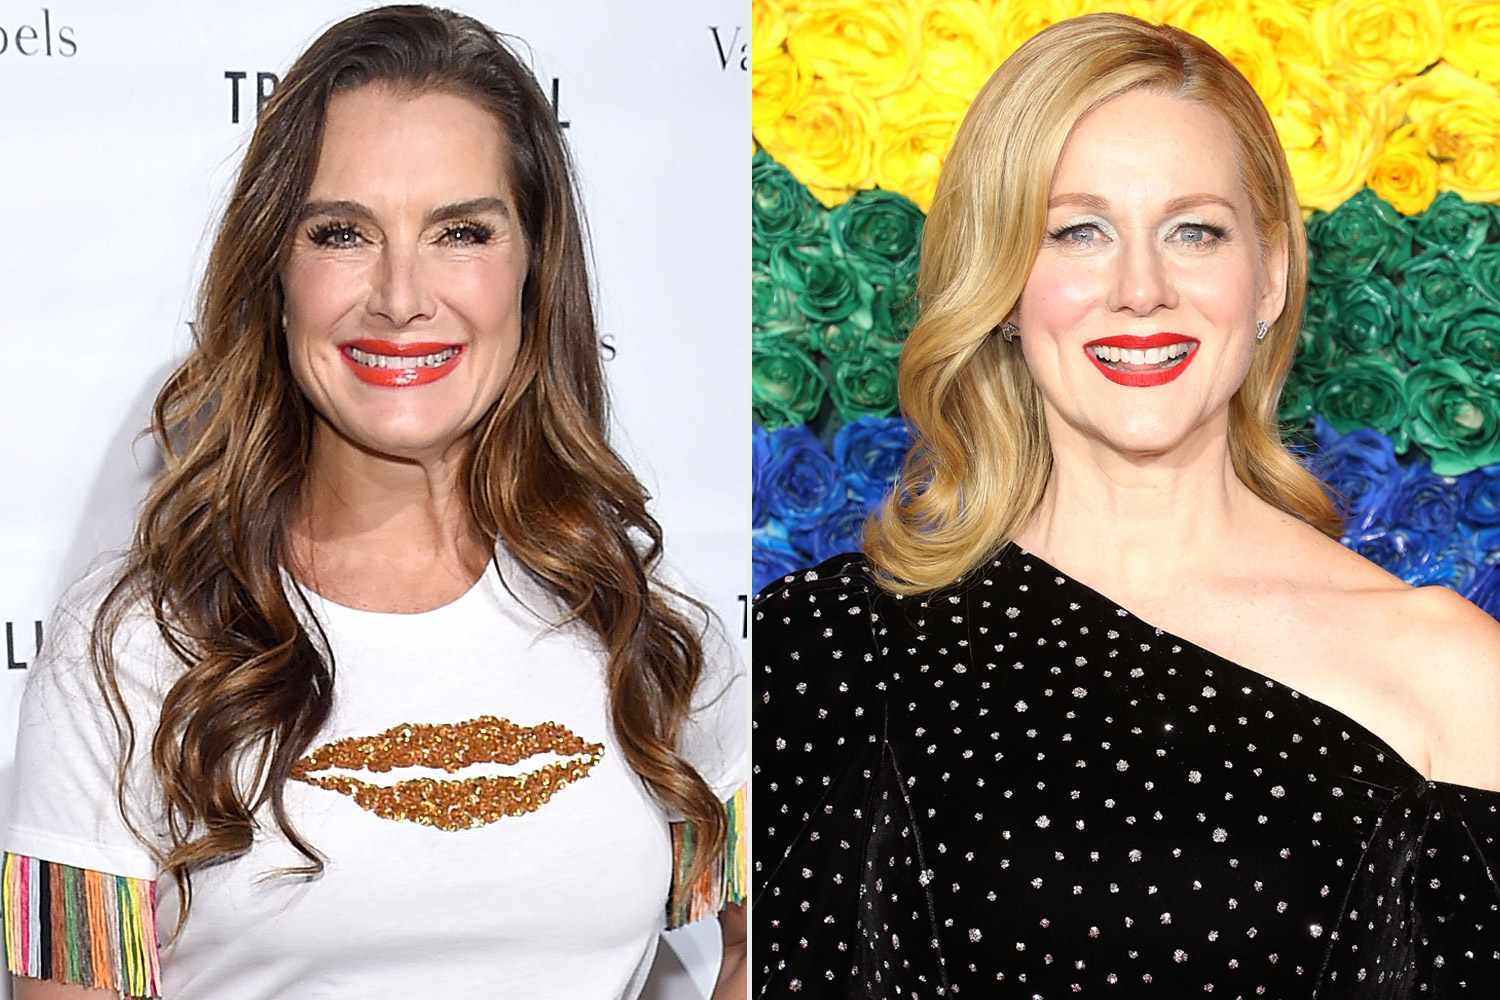 Brooke Shields Reveals She and Laura Linney Were Childhood Friends